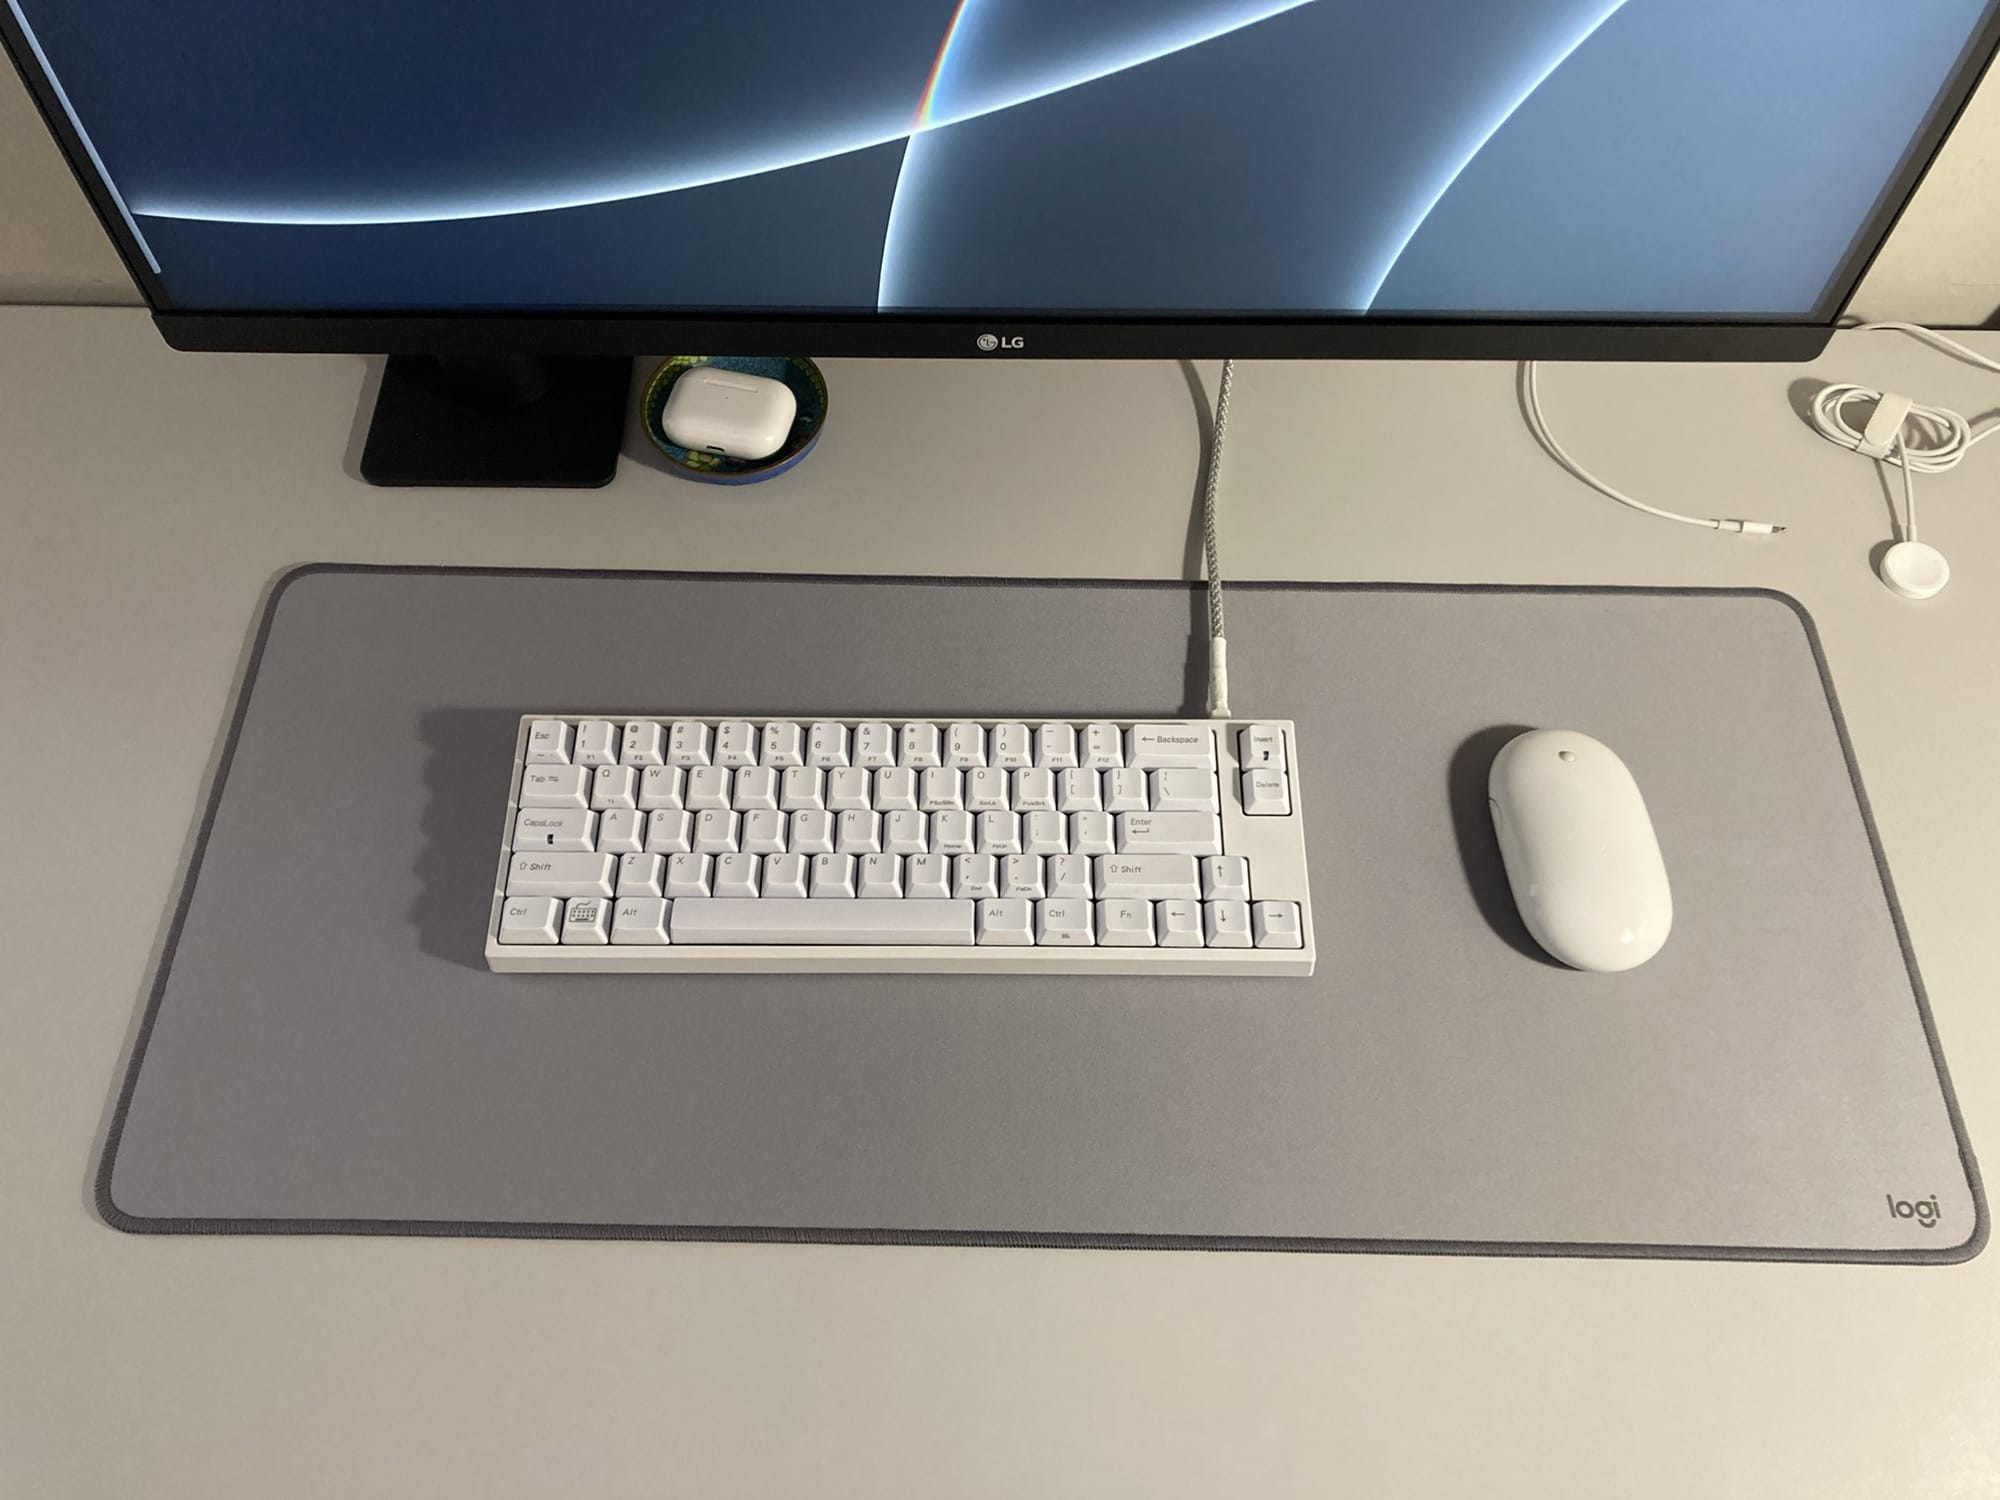 Here's a closer look at the input devices. The Mighty Mouse came out in 2005.